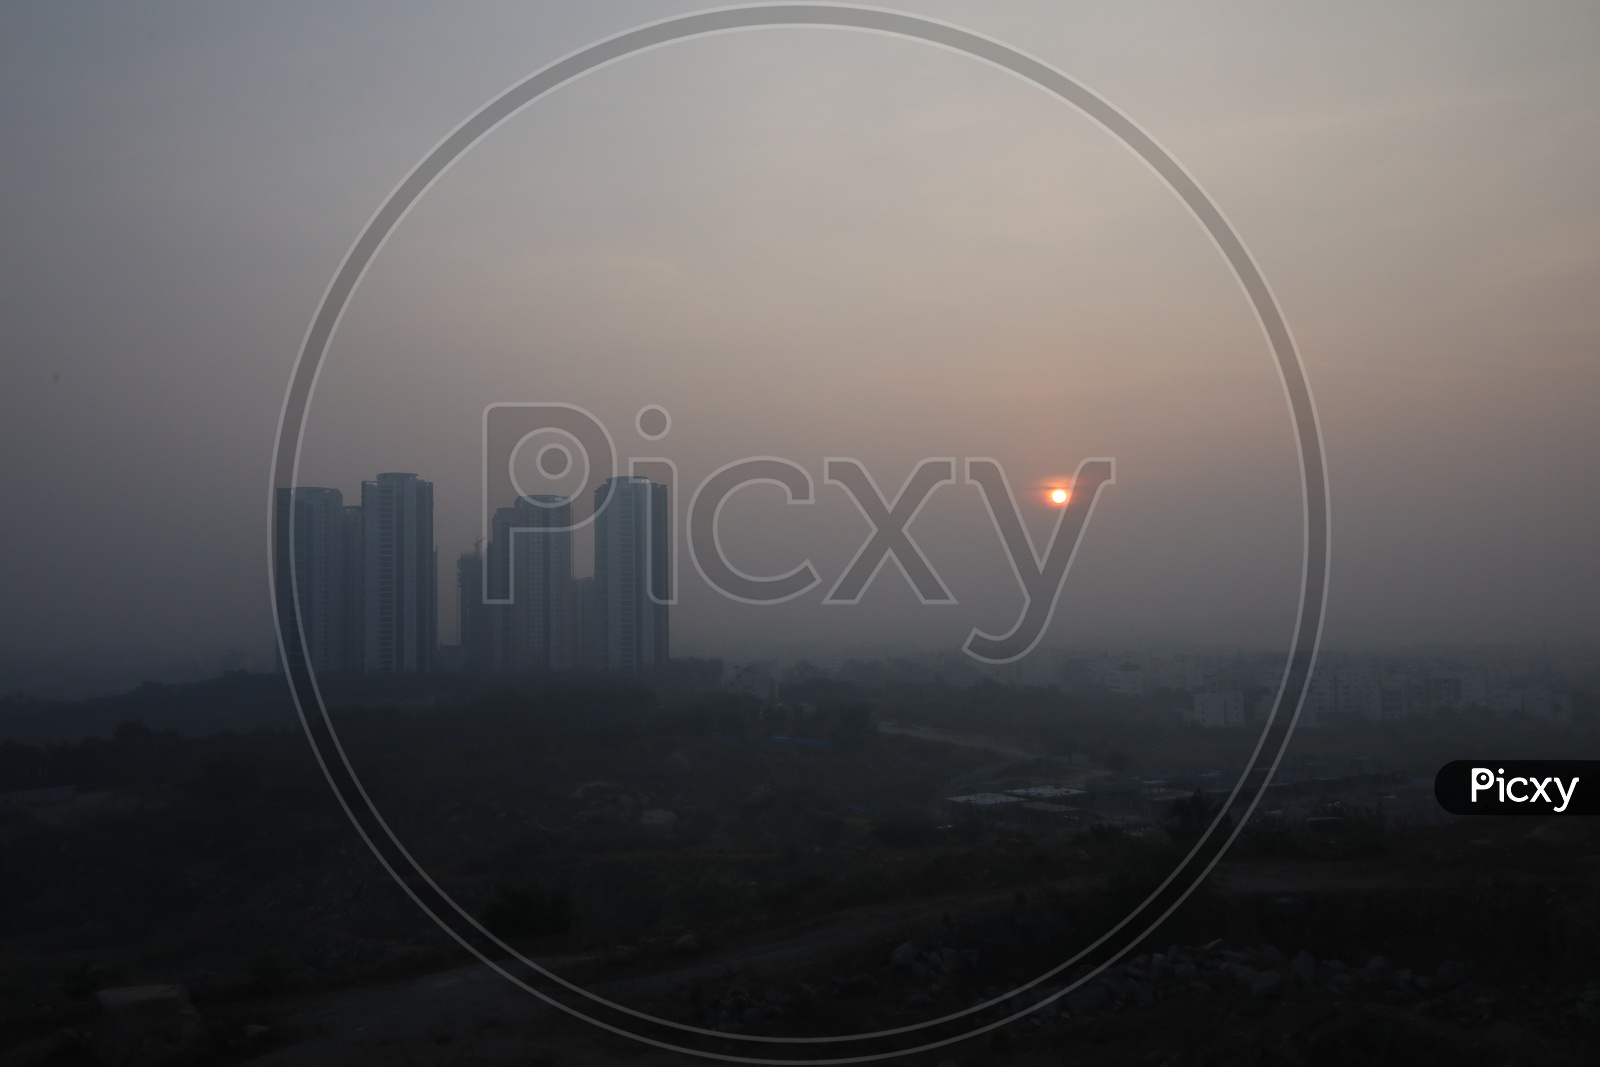 Sunrise Over a City Scape With High Rise Buildings